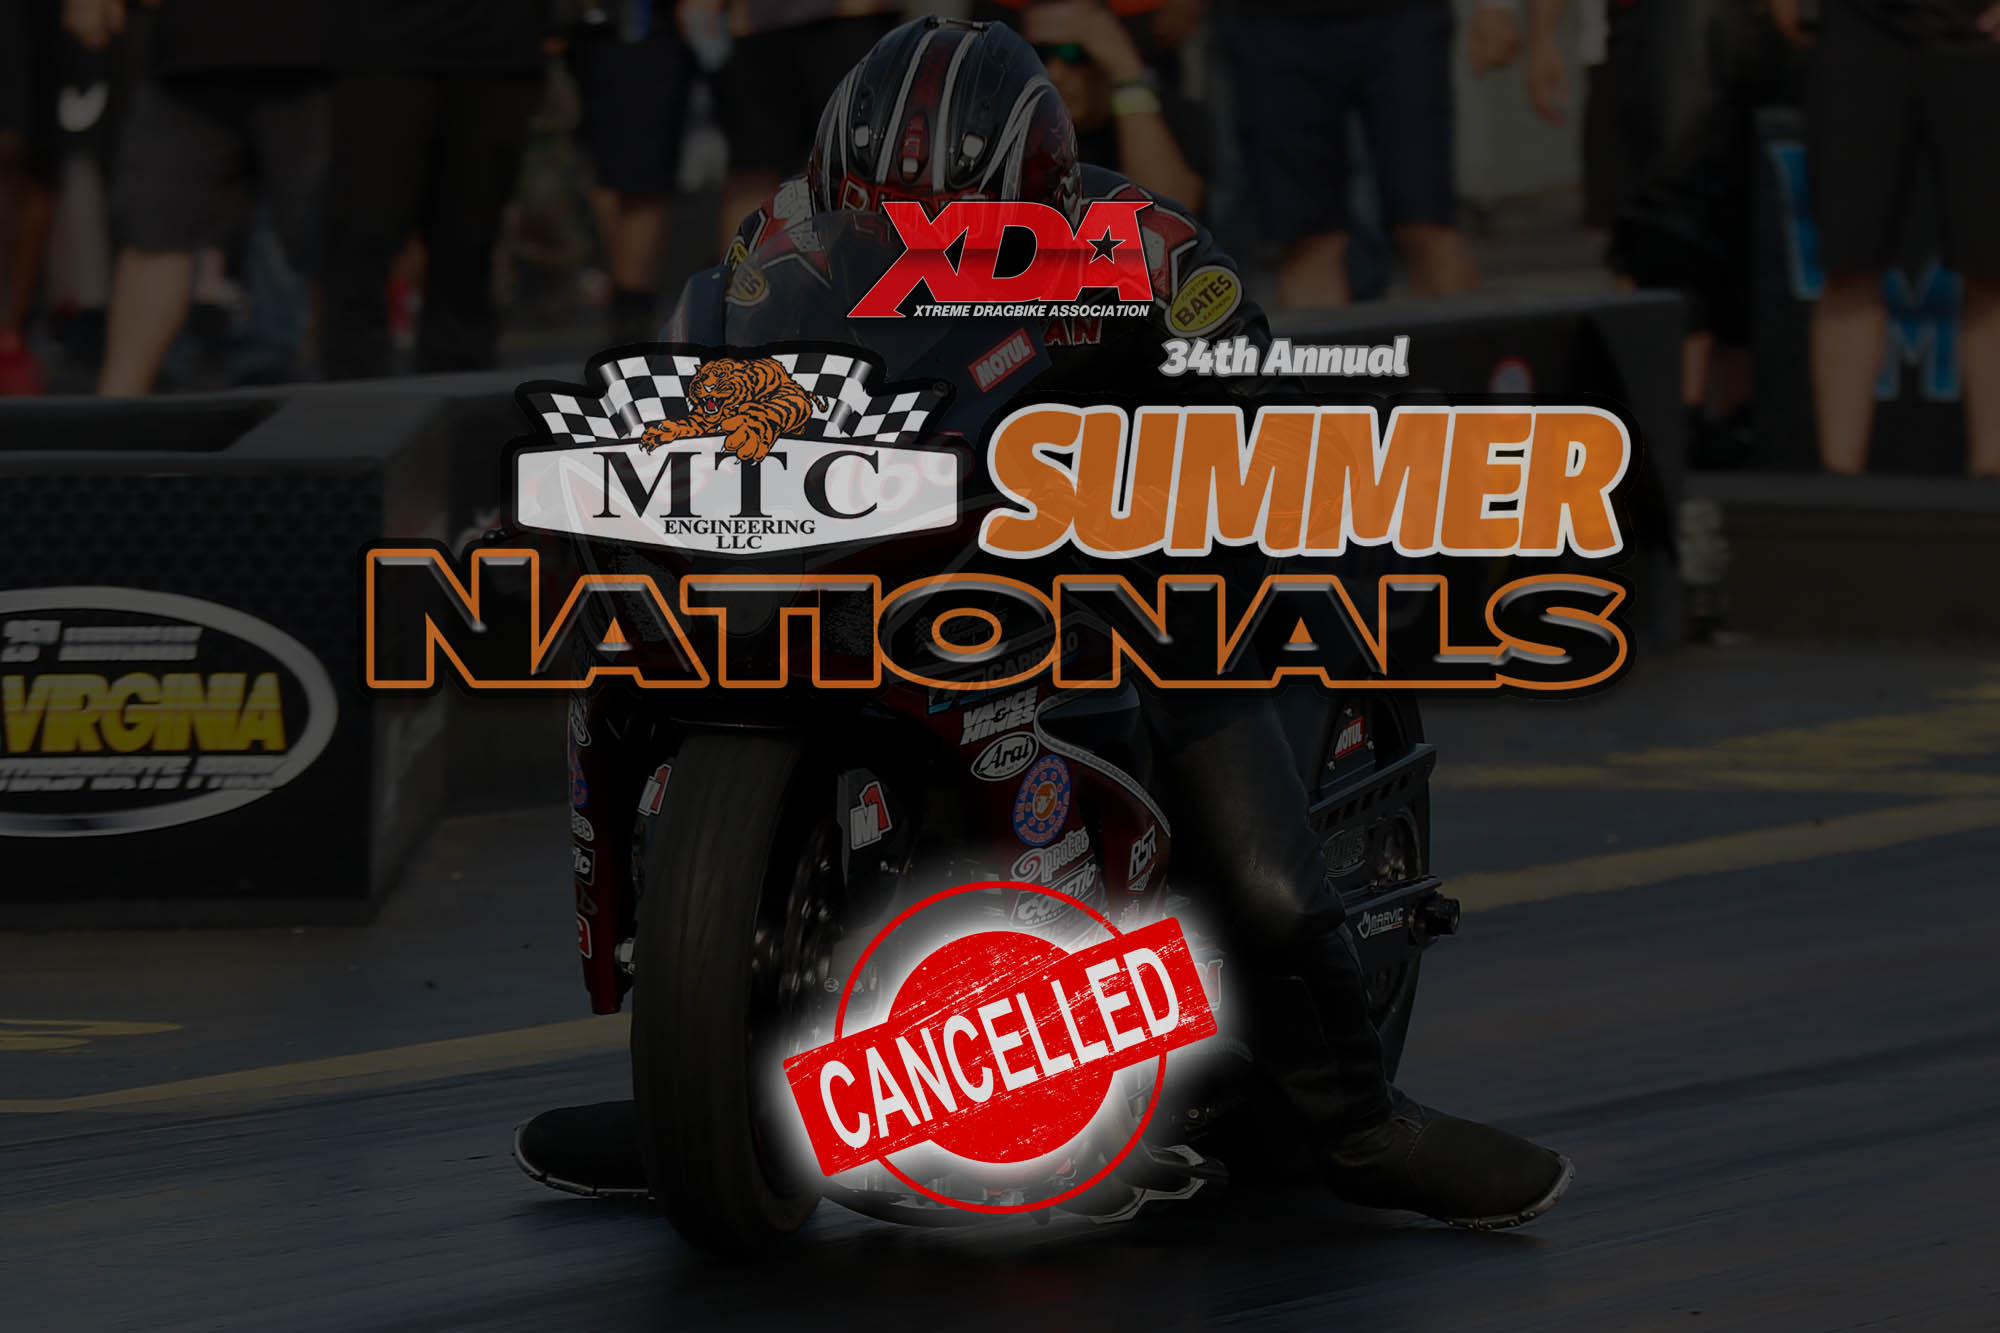 XDA MTC Summer Nationals Cancelled Due to COVID-19